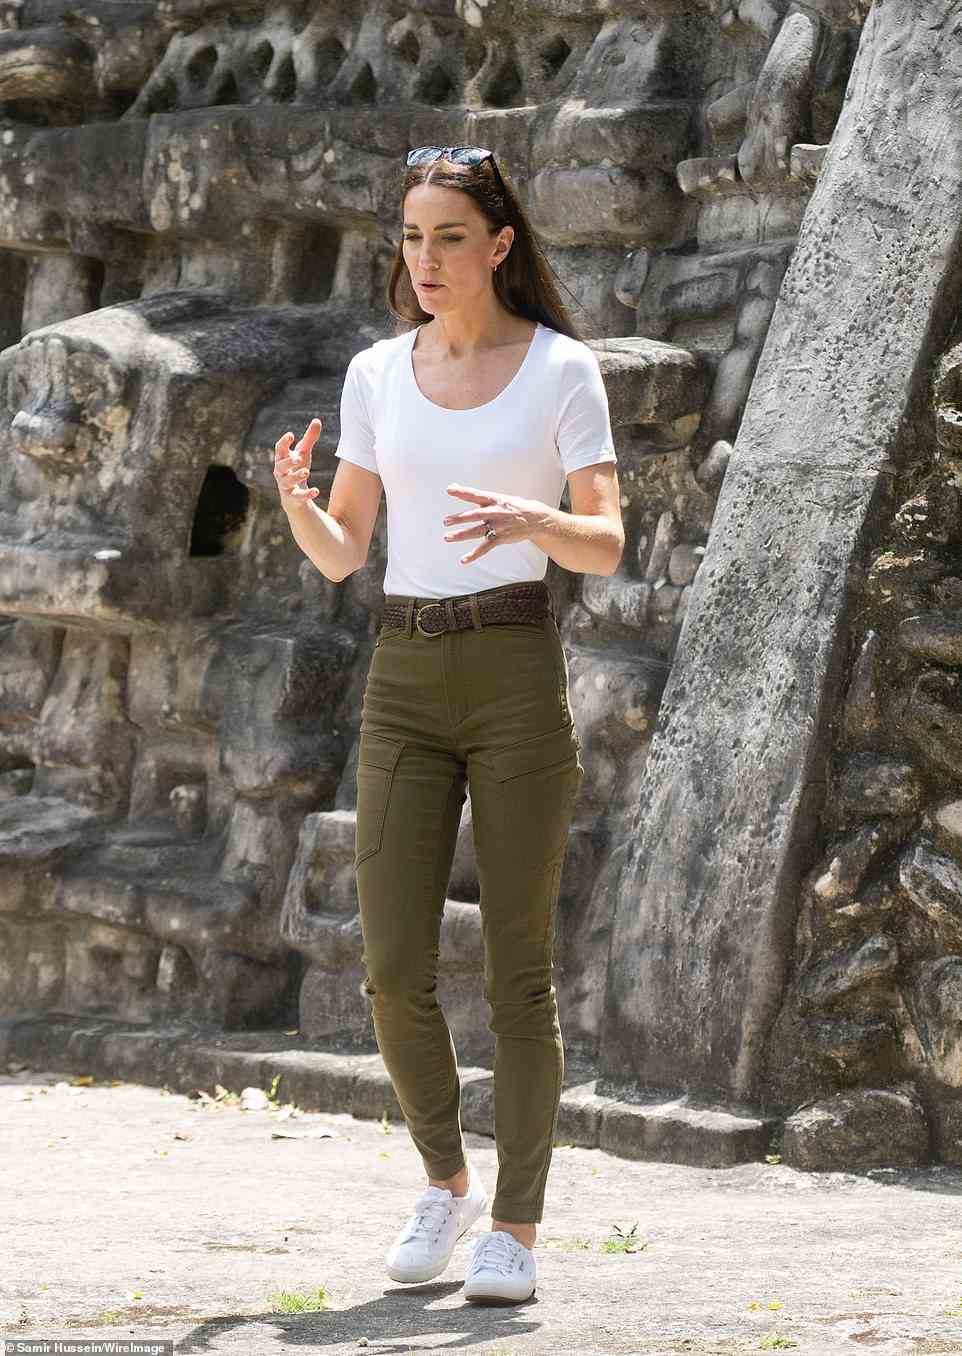 Kate could be seen gesturing at the site while at ground level and when they climbed half way up Caana and looked out from a platform, the couple stood with their hands on their hips looking around